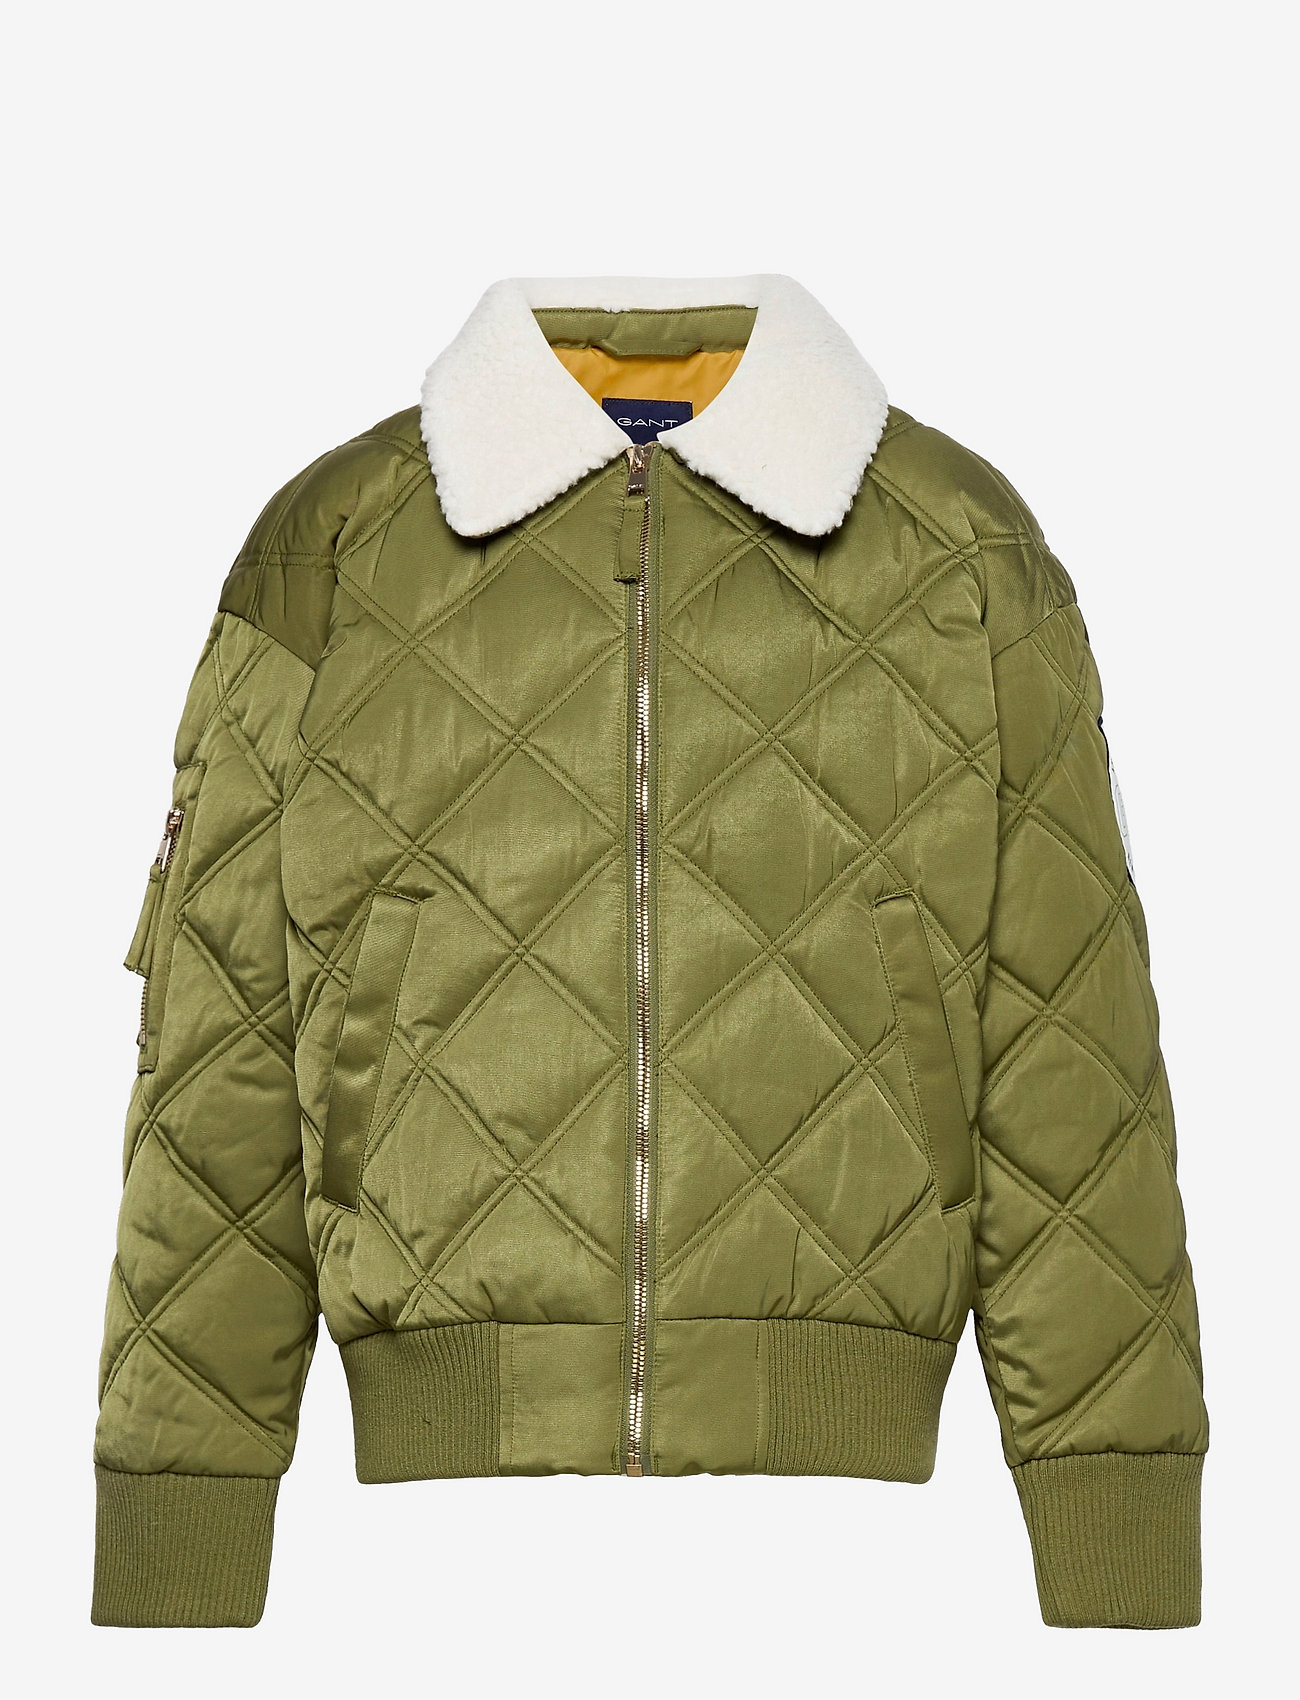 GANT - D2. QUILTED AVIATOR JACKET - quilted jackets - olive branch green - 0